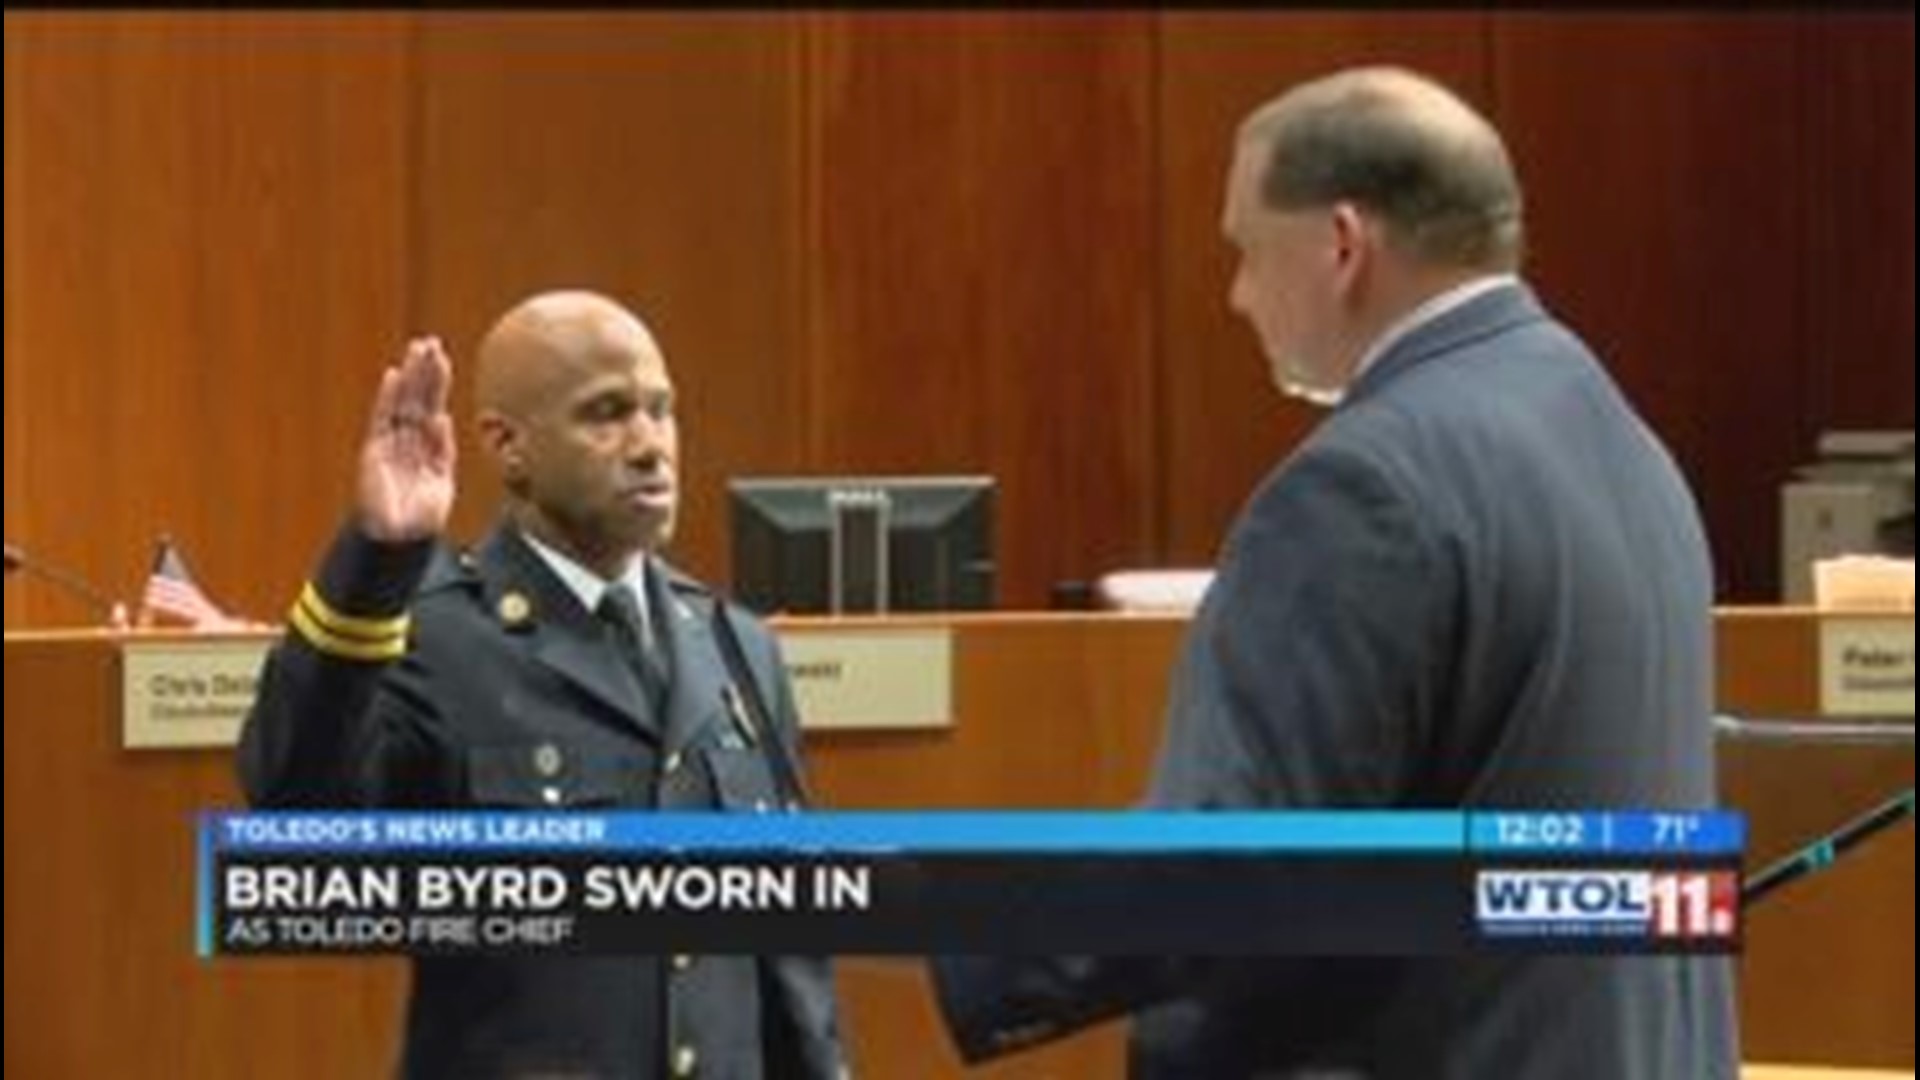 Chief Brian Byrd officially sworn in as Toledo's new fire chief